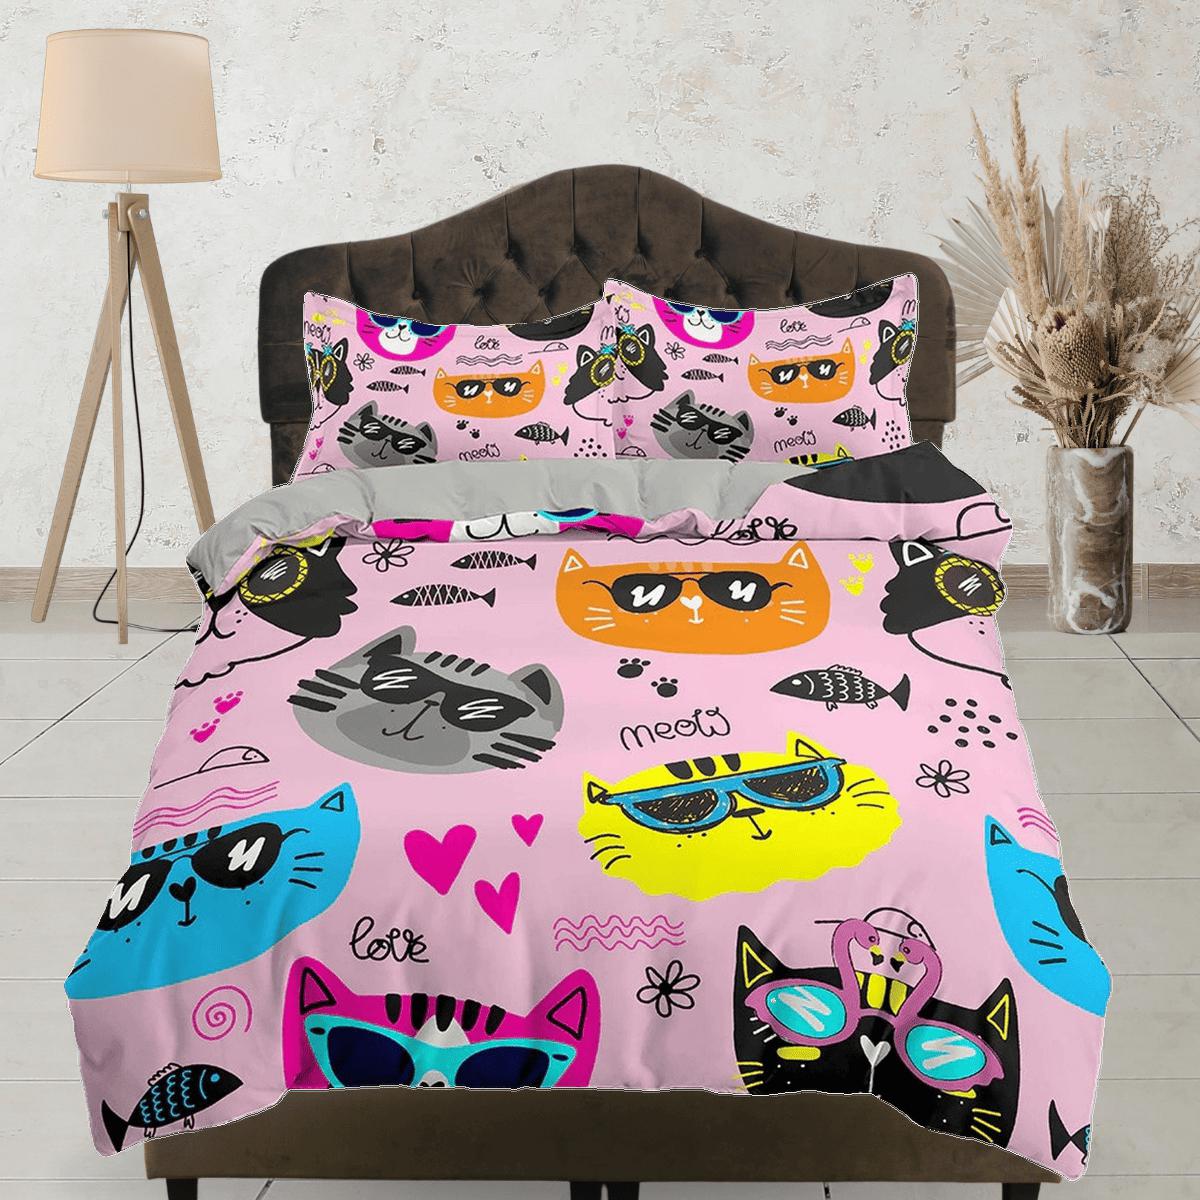 daintyduvet Cool Cats in Different Colors Kids Pink Duvet Cover Set, Toddler Bedding, Kids Bedroom, Cute Bedding, Duvet King Queen Full Twin Single